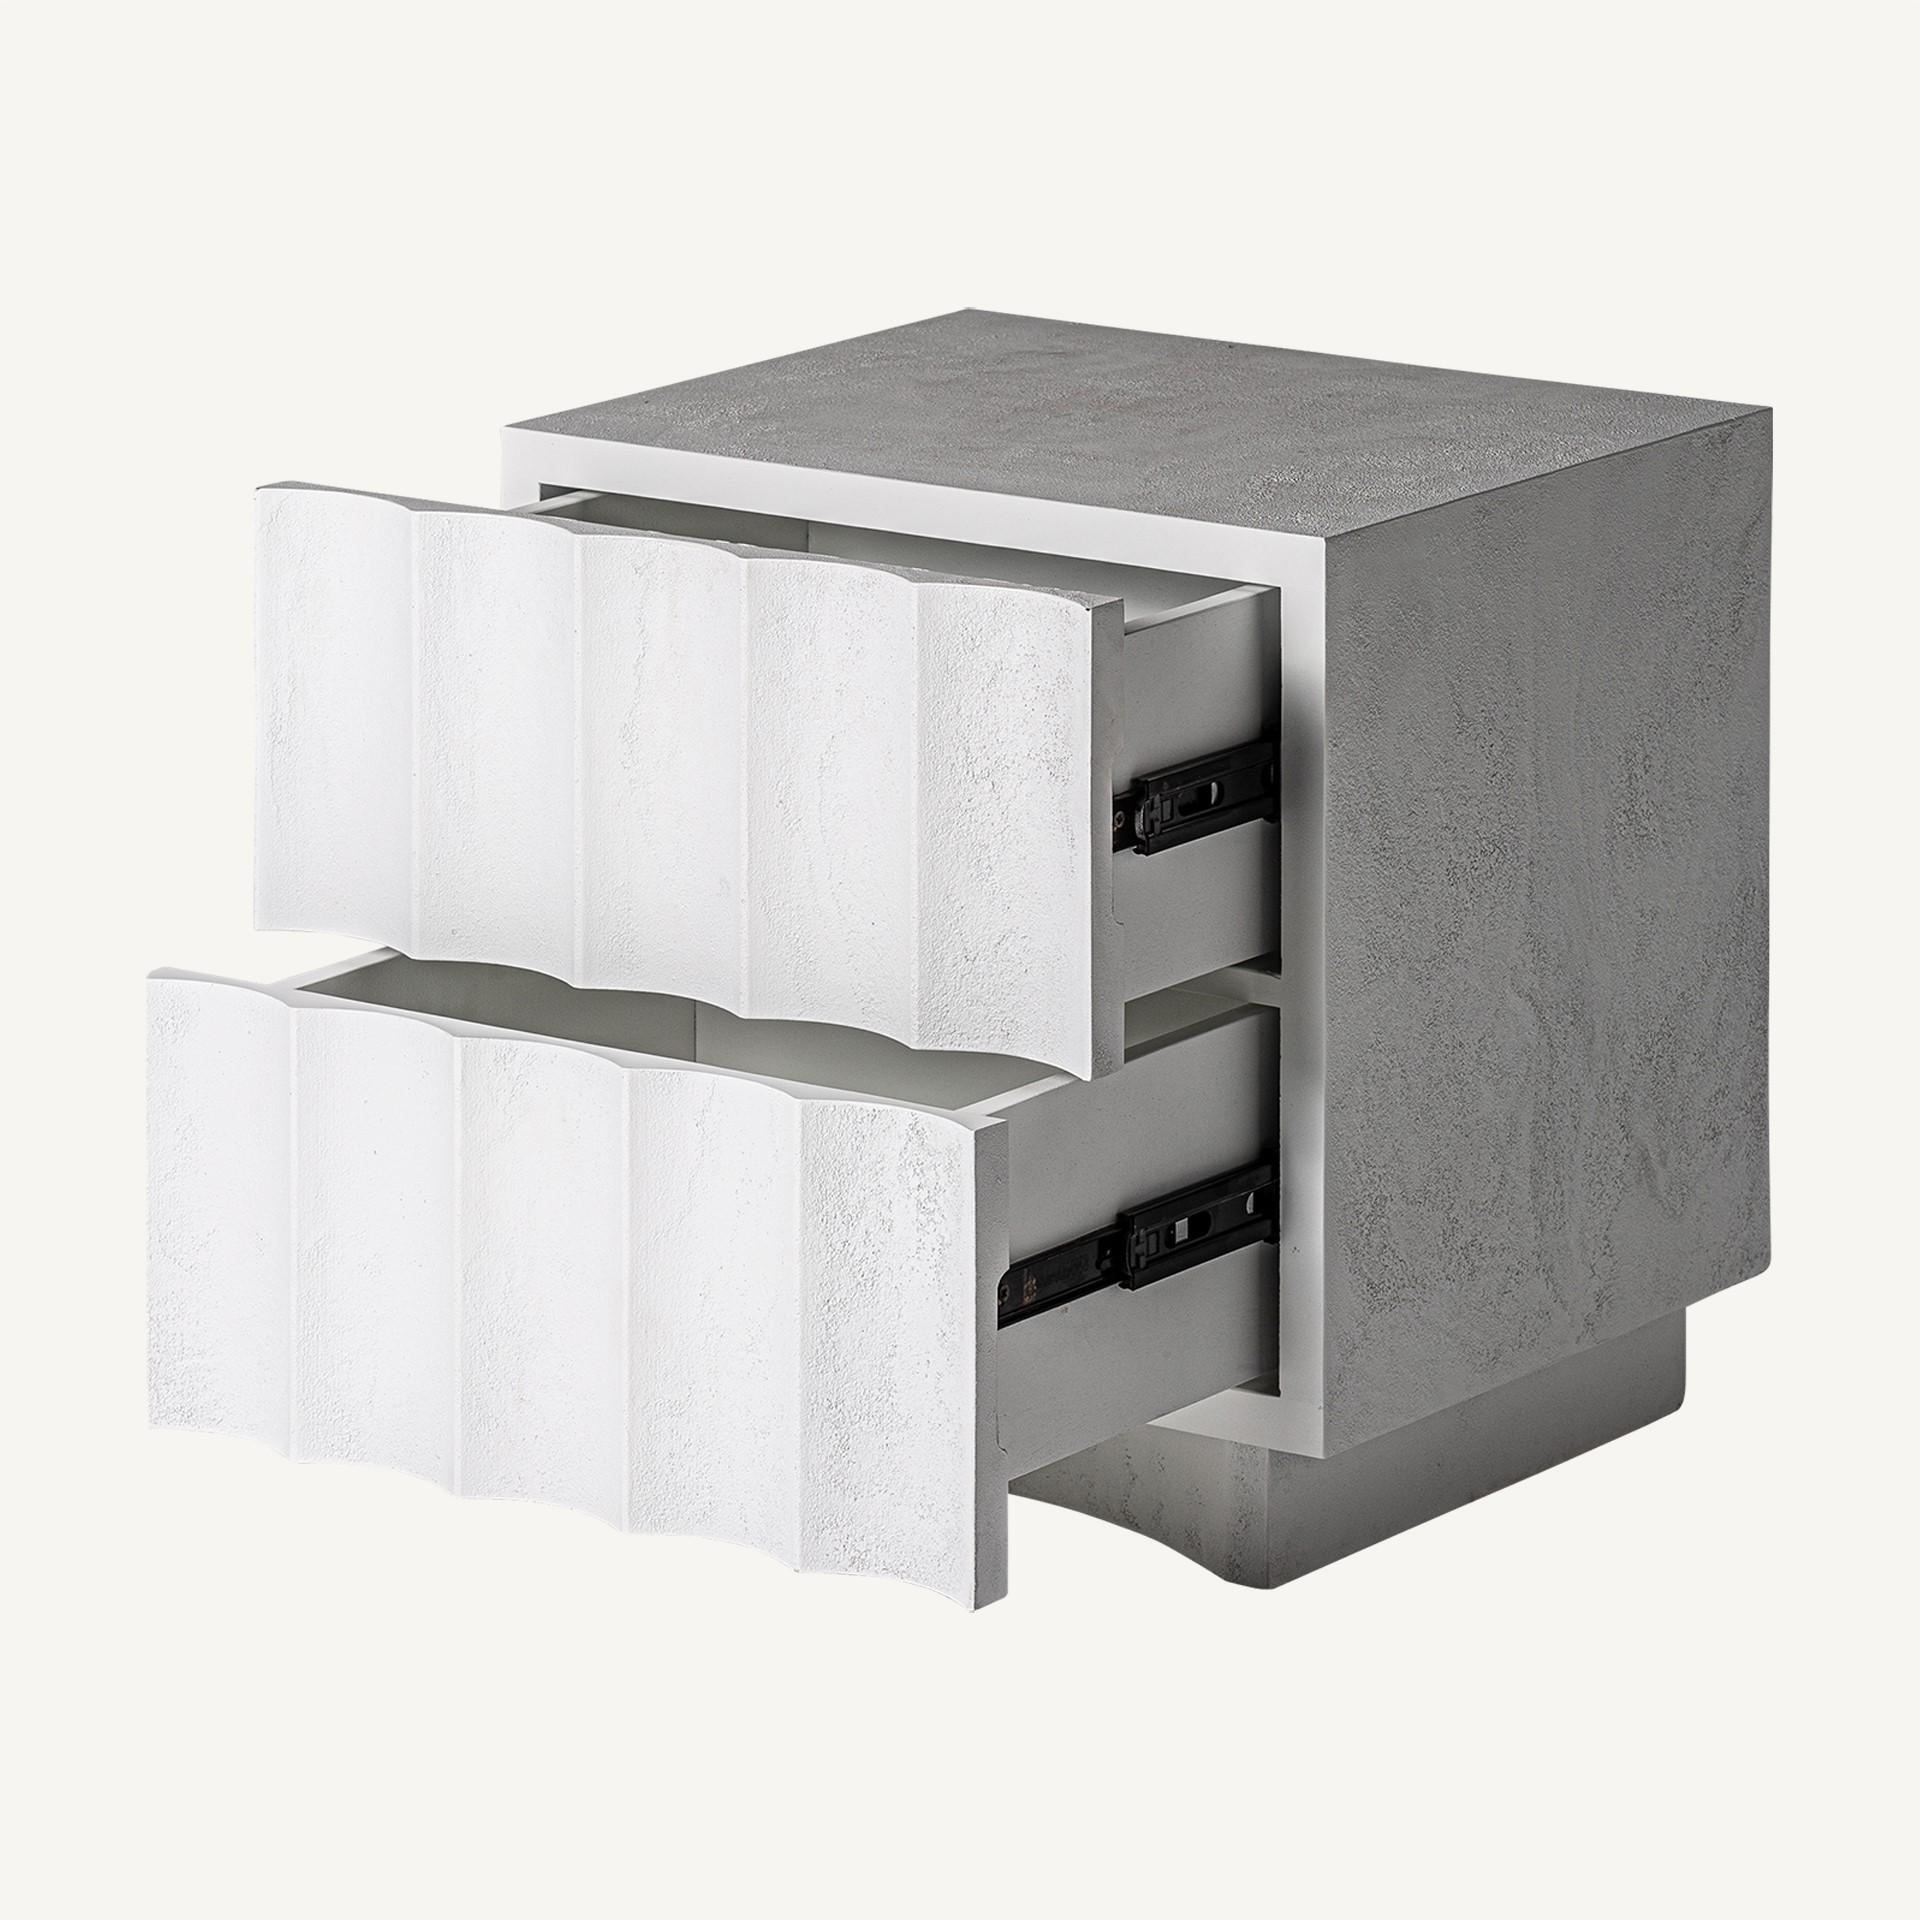 Graphic and Italian design with brutalist style bedside table in white concrete stone finishes.